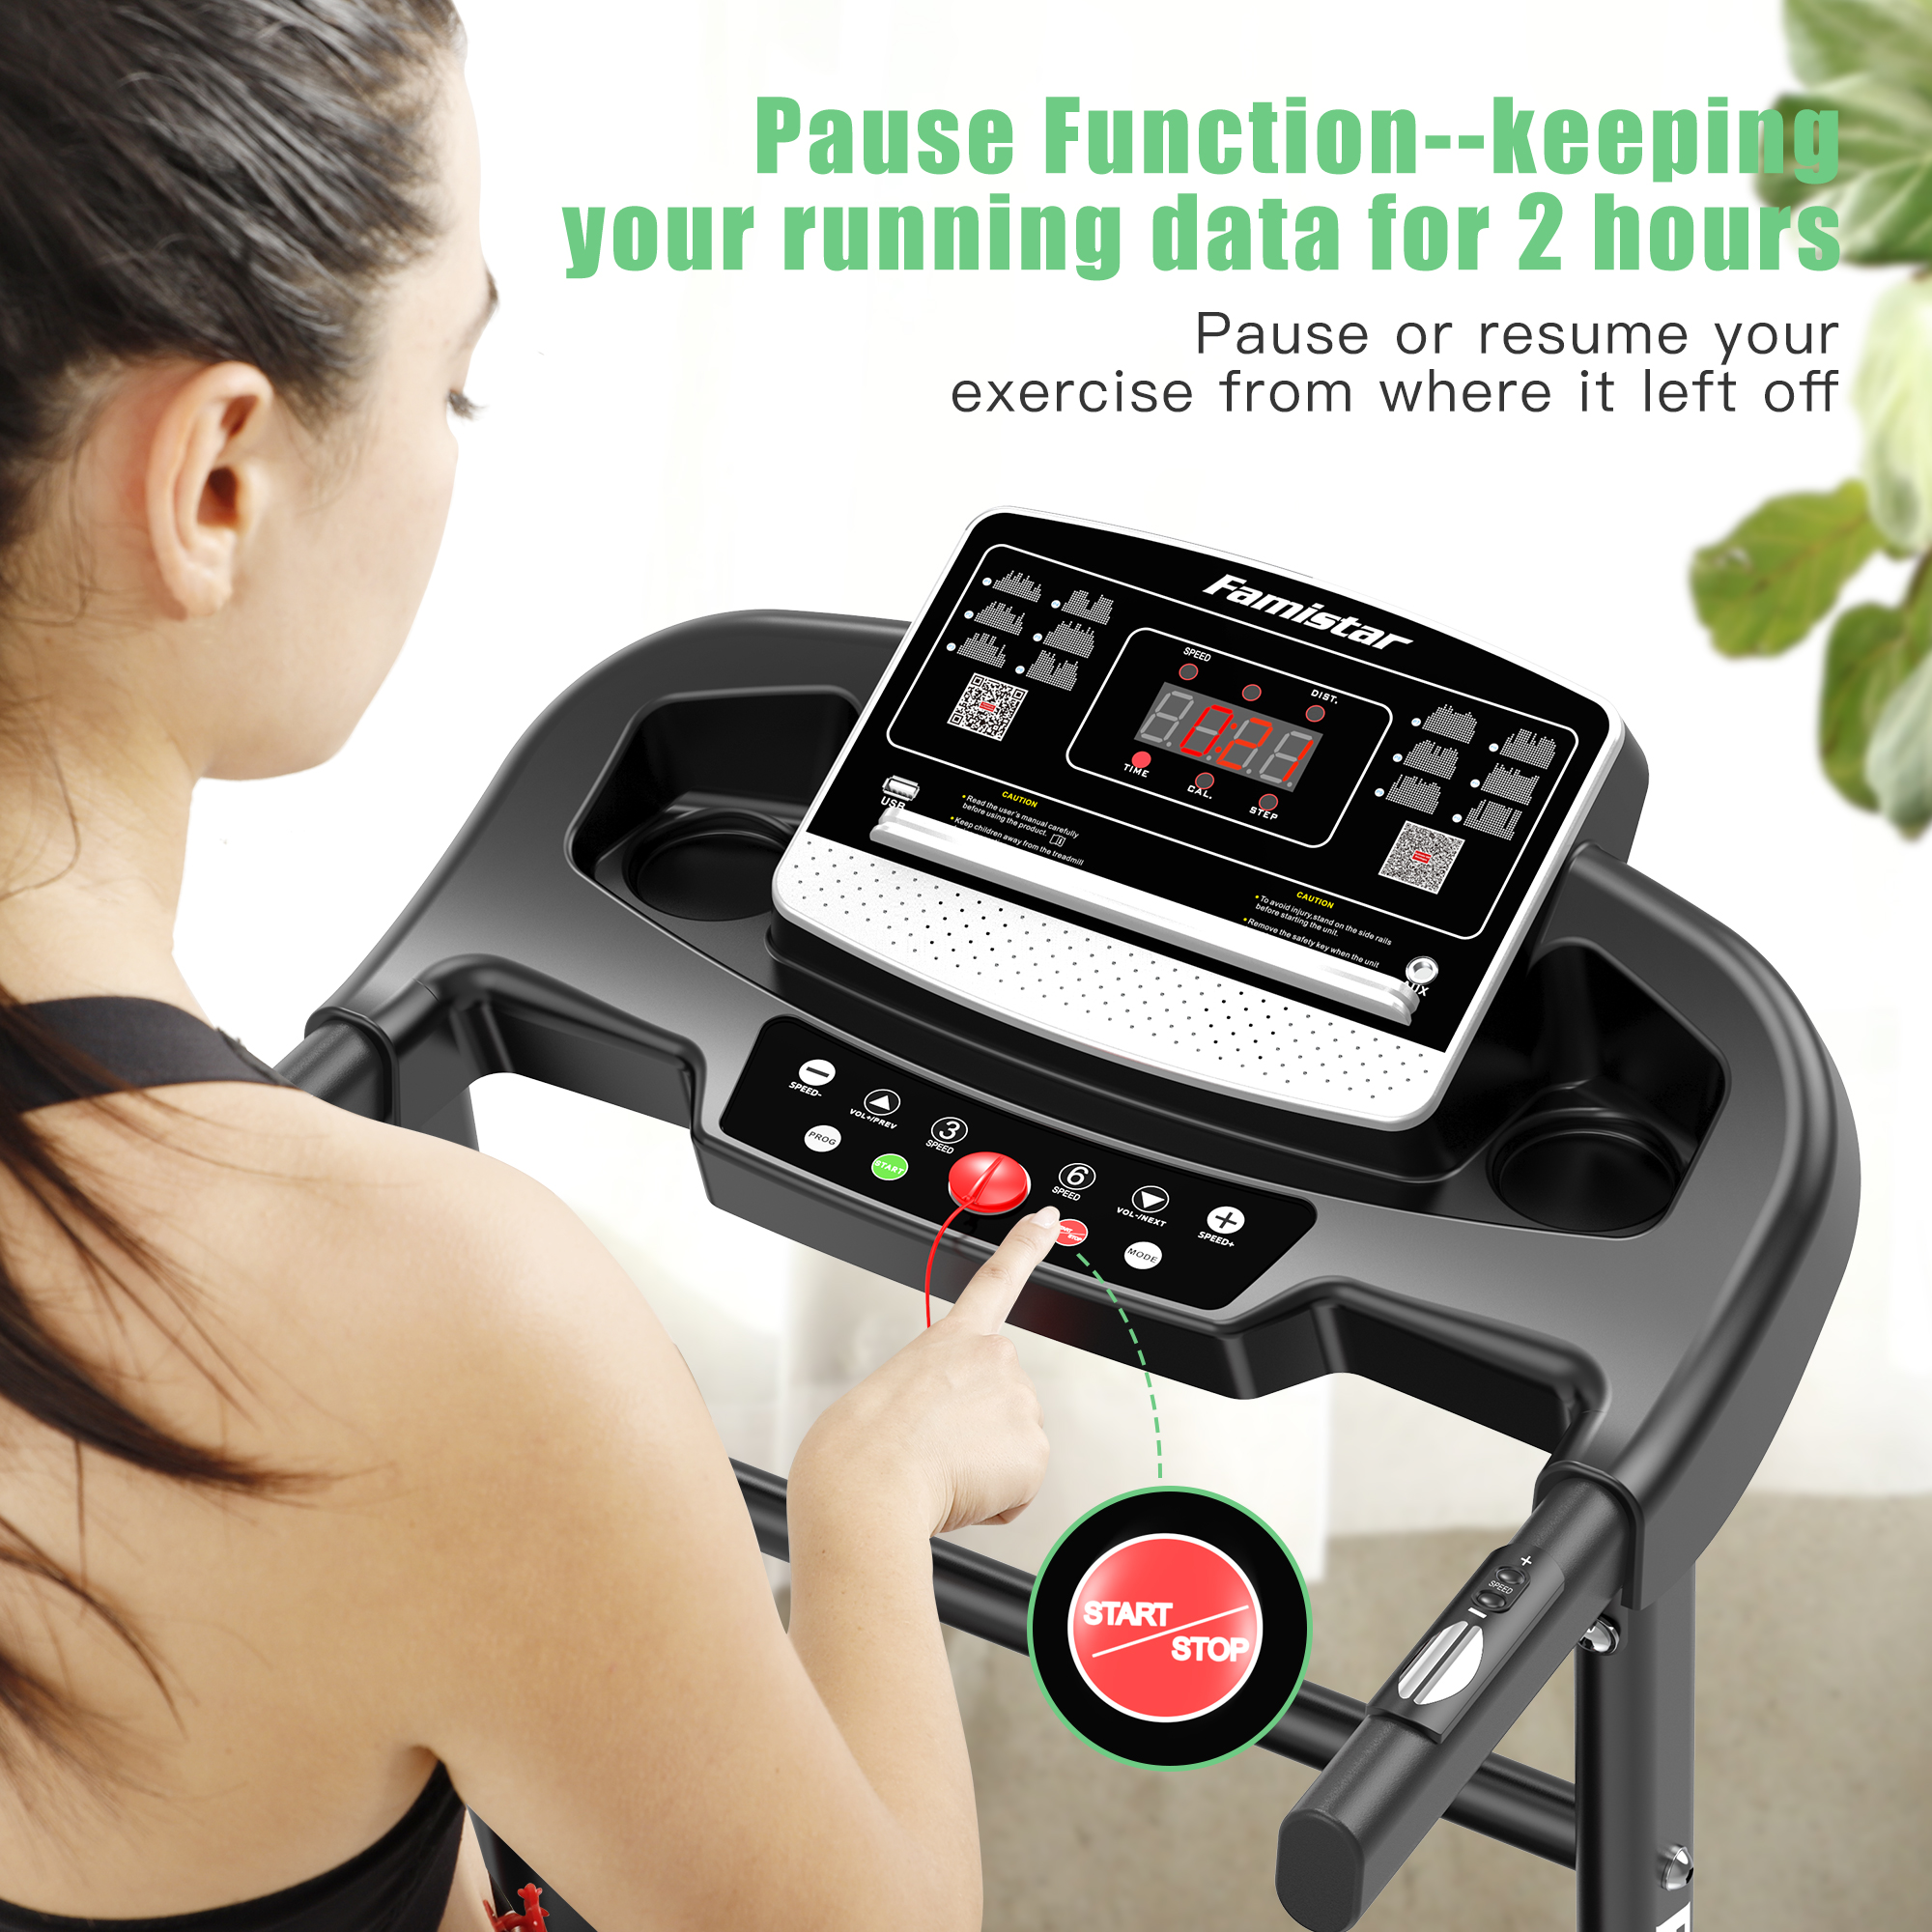 Famistar JK1607 Folding Electric Treadmill for Home Jogging Running with 2.5HP 3 Manual Incline | MP3 Player | Safety Key | LCD Display | Cup Holder - Portable Space Saving - Free Gift 2 Knee Straps - image 4 of 11